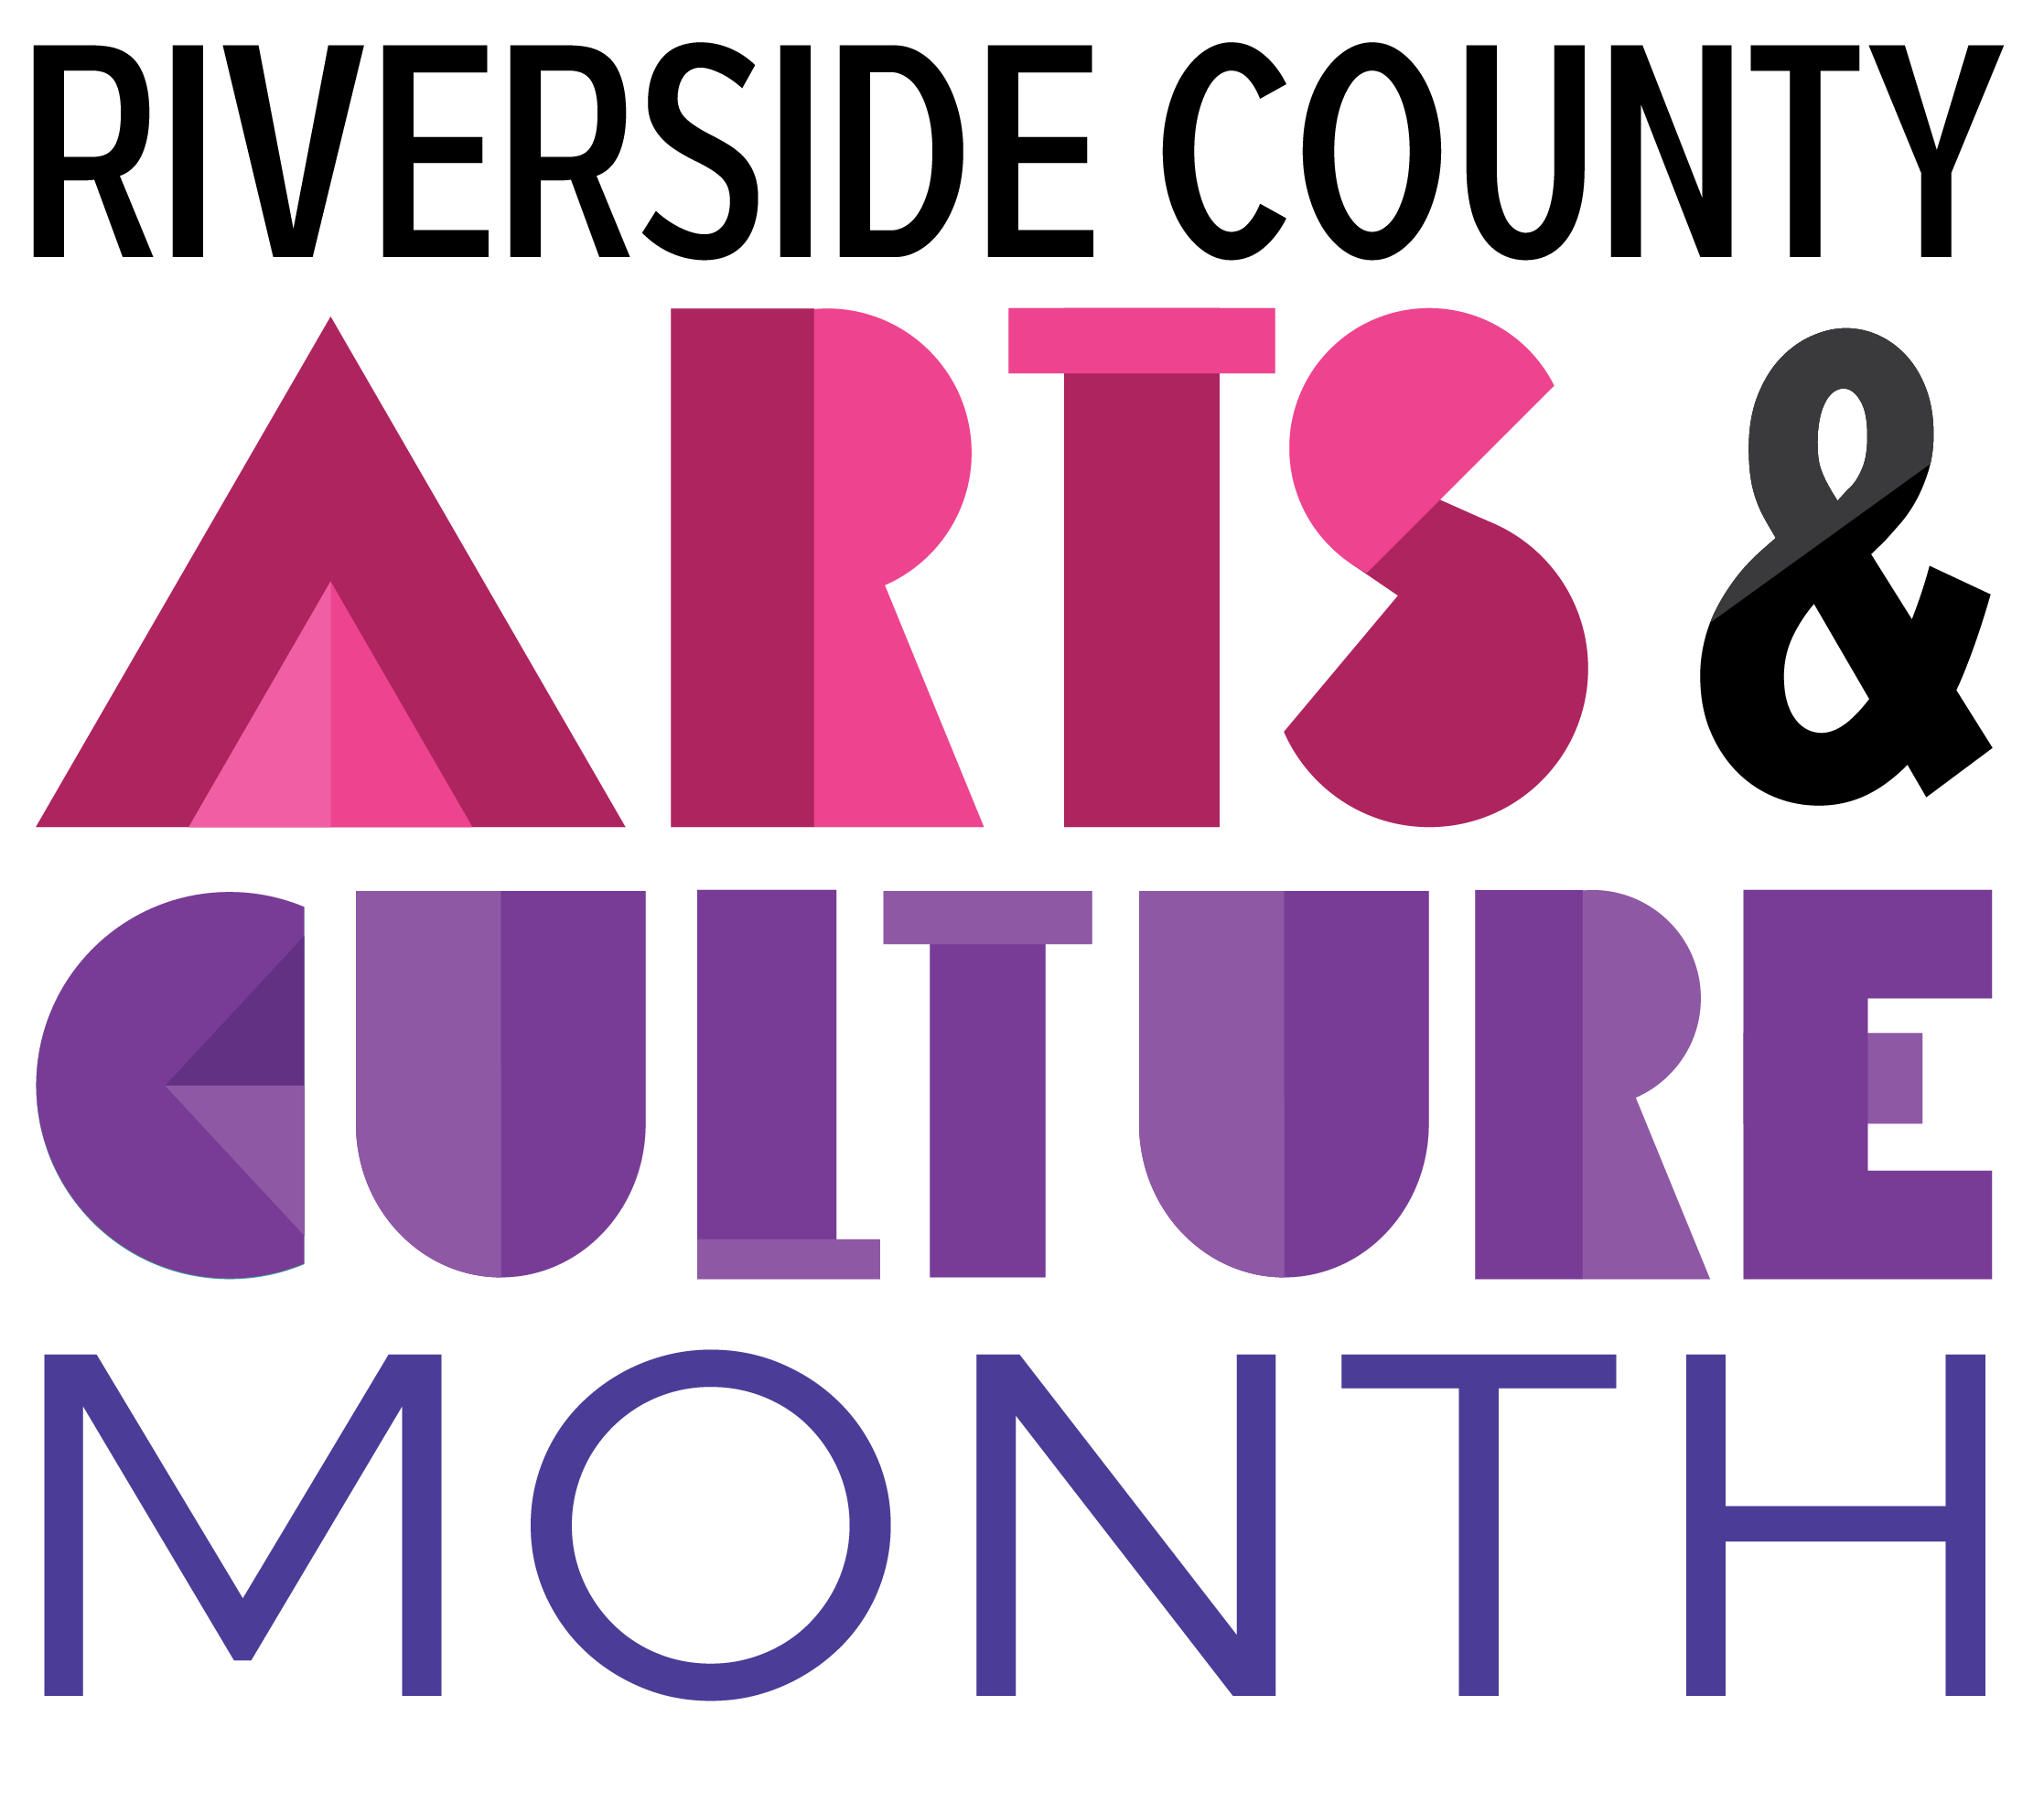 March: Riverside County Arts & Culture Month